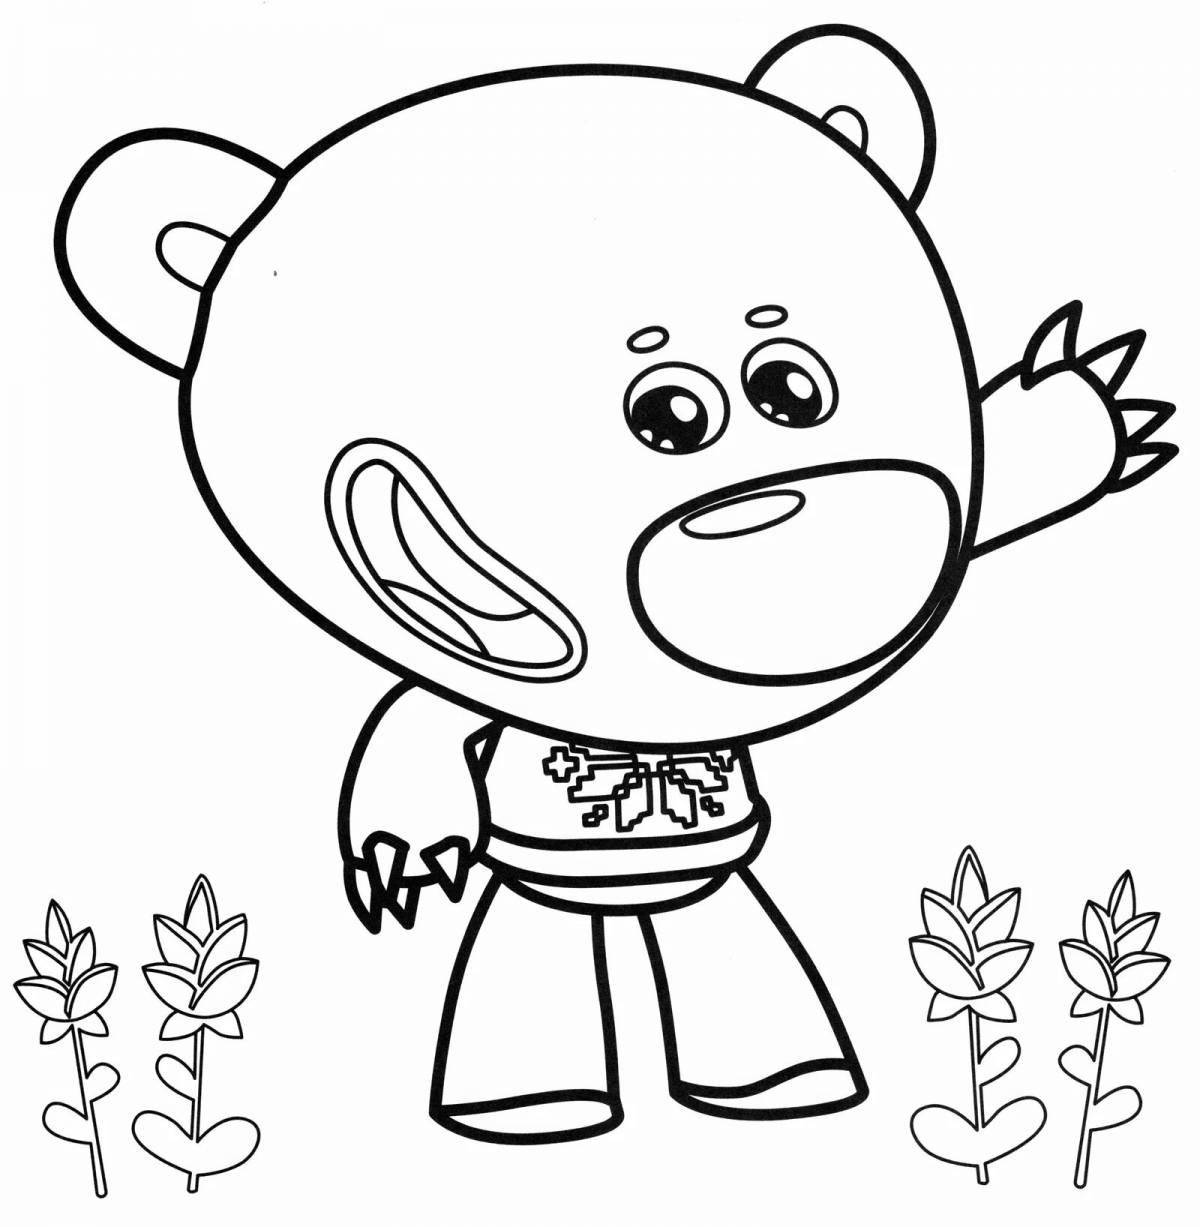 Exciting hiding place coloring page